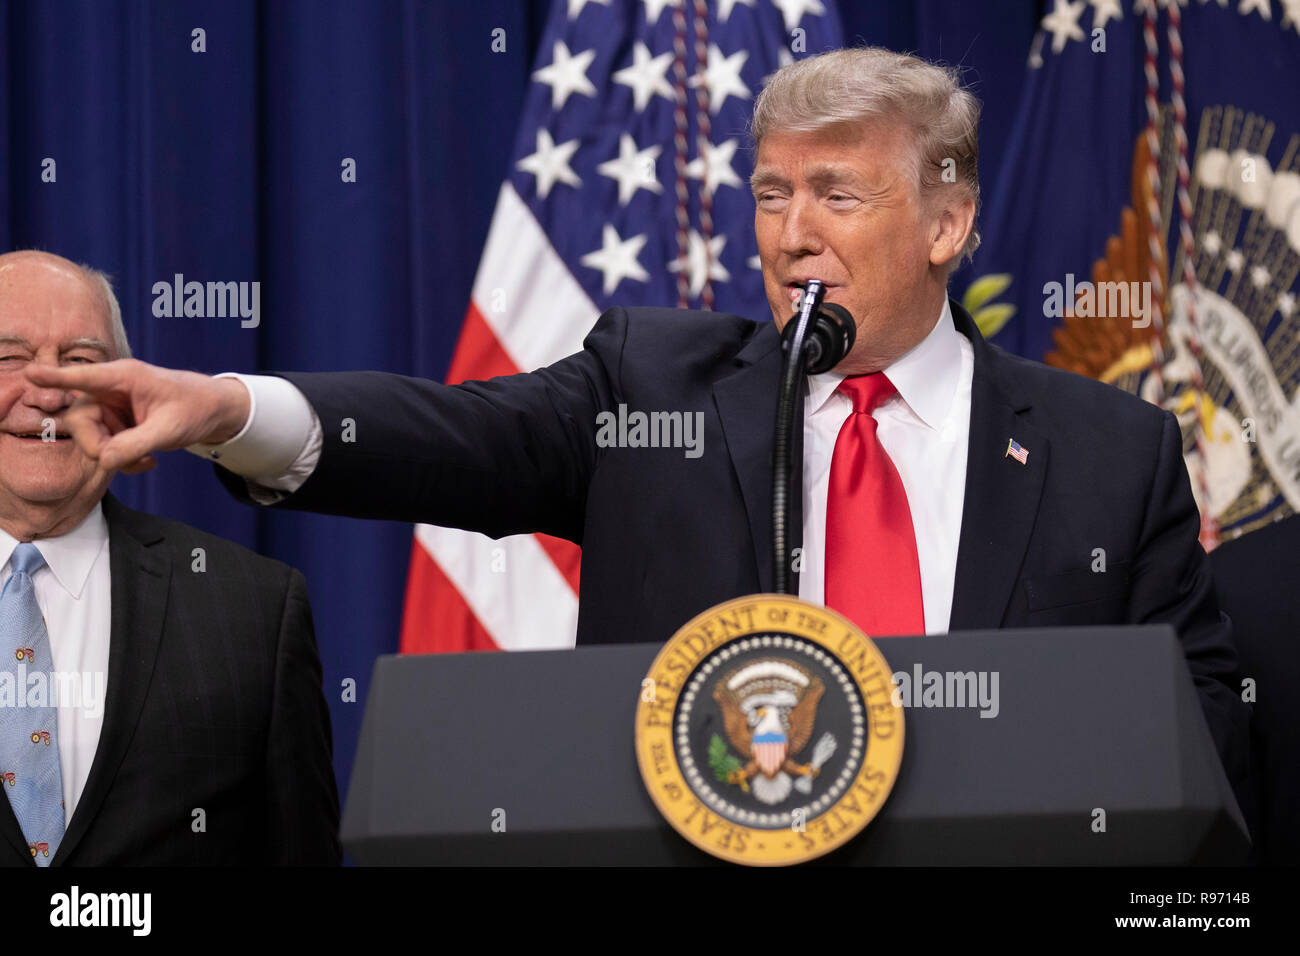 Washington, United States Of America. 20th Dec, 2018. US President Donald Trump delivers remarks before signing the Farm Bill into law at the White House in Washington, DC on December 20, 2018. Credit: Alex Edelman/CNP | usage worldwide Credit: dpa/Alamy Live News Stock Photo